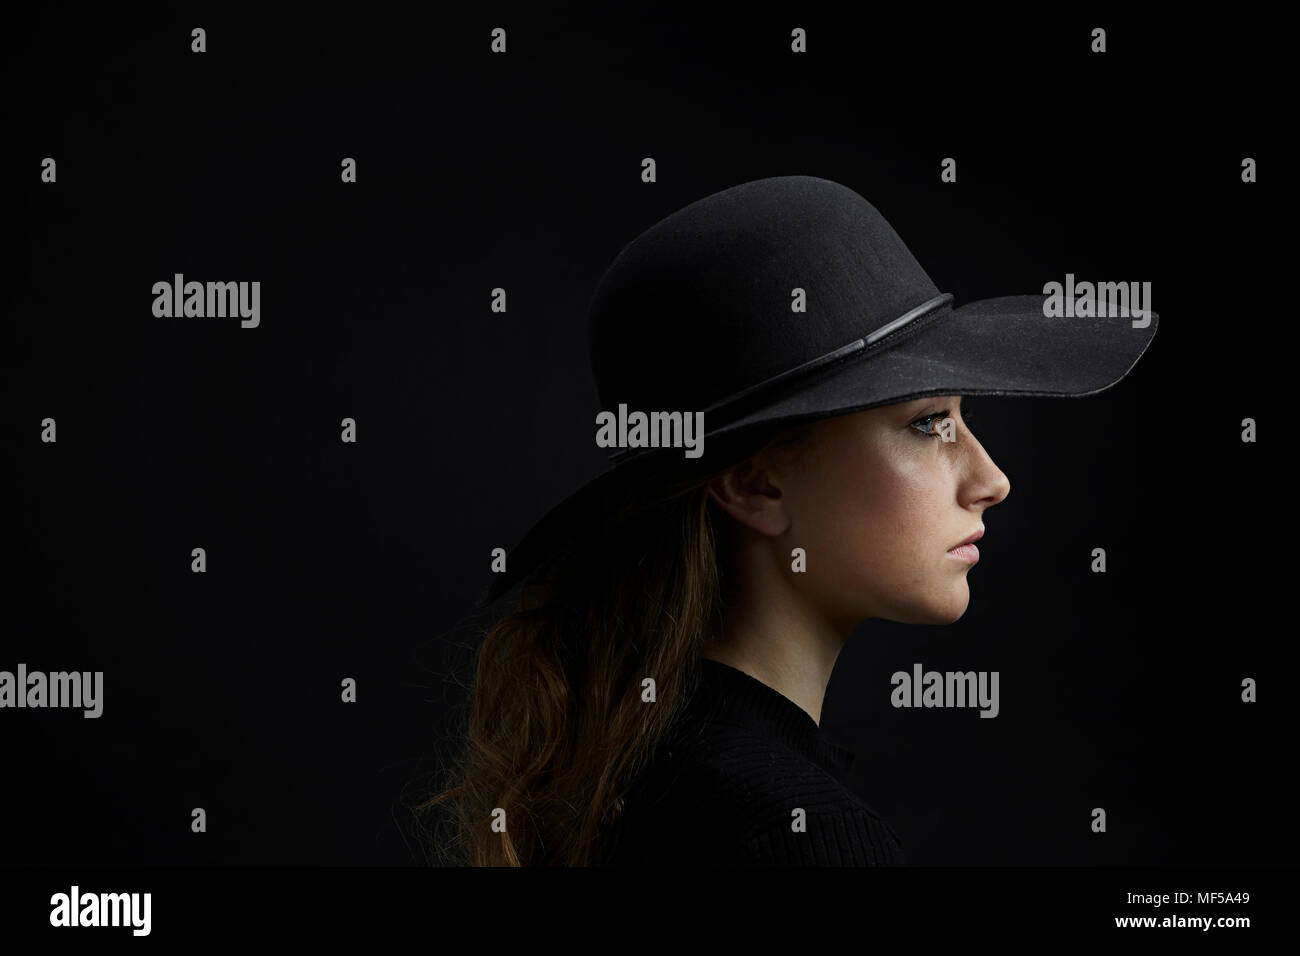 Profile of sad young woman wearing black hat against black background Stock Photo